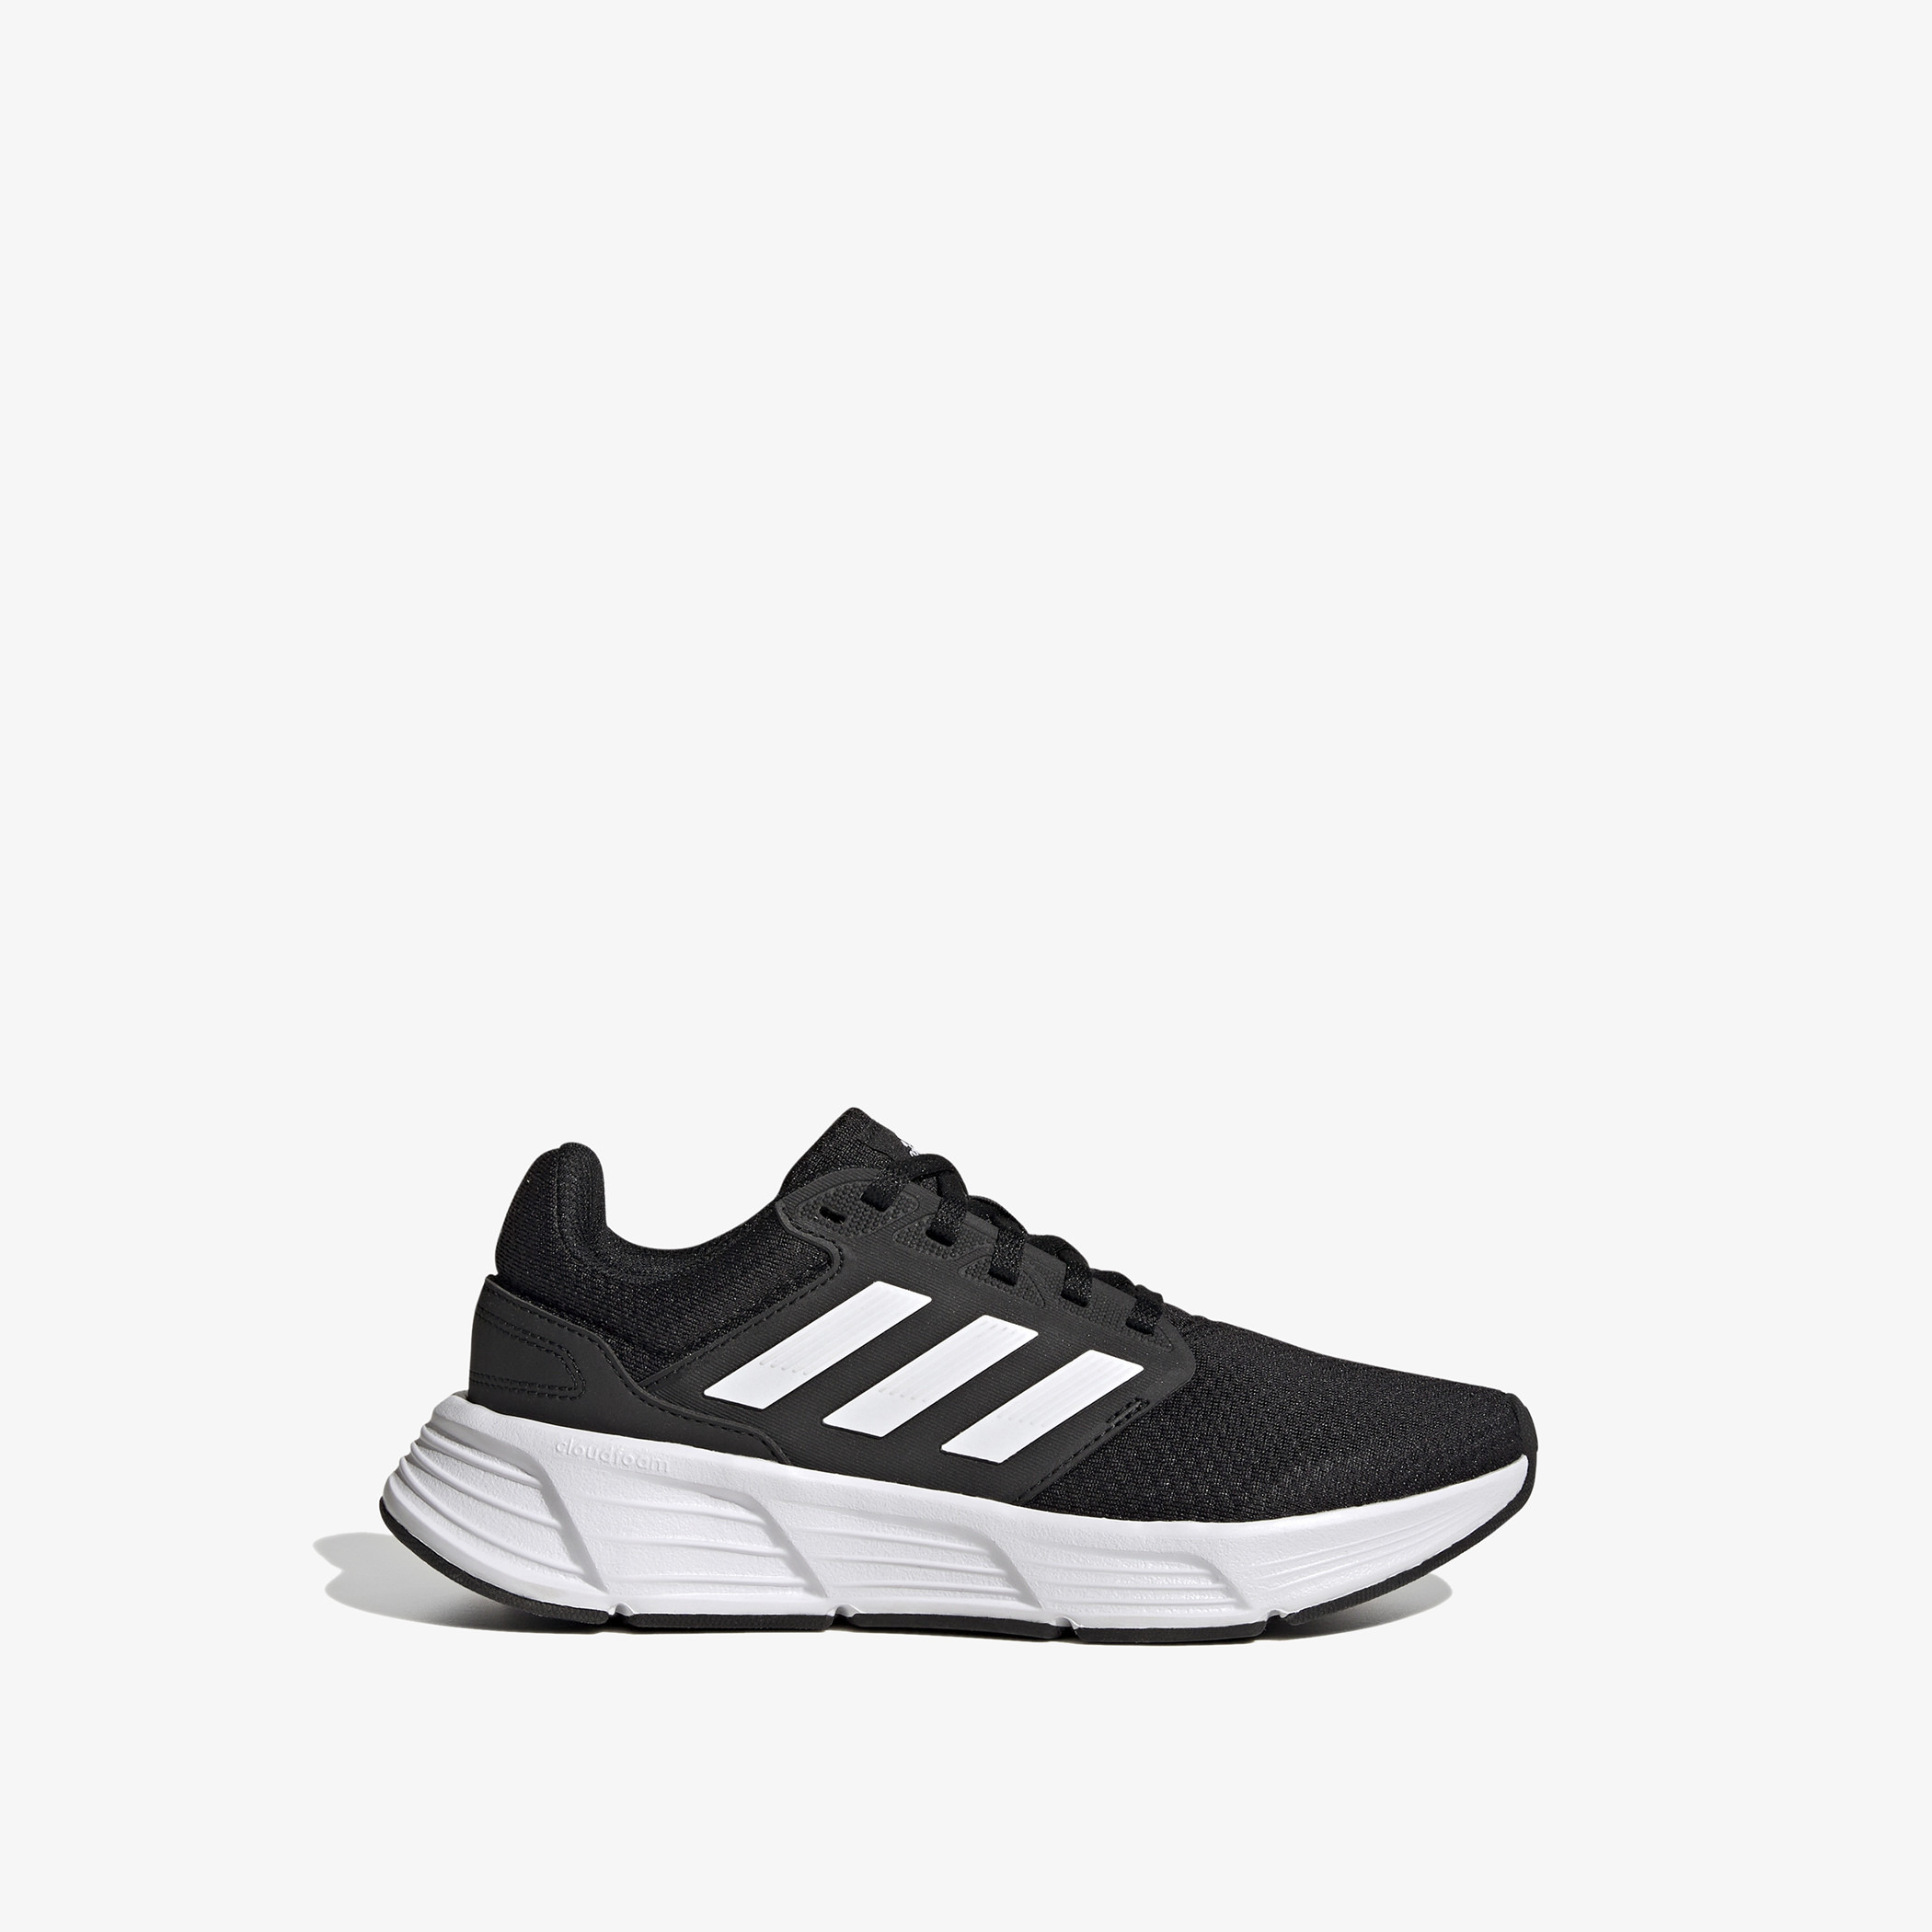 adidas Originals sneakers ZX 1K Boost white color buy on PRM